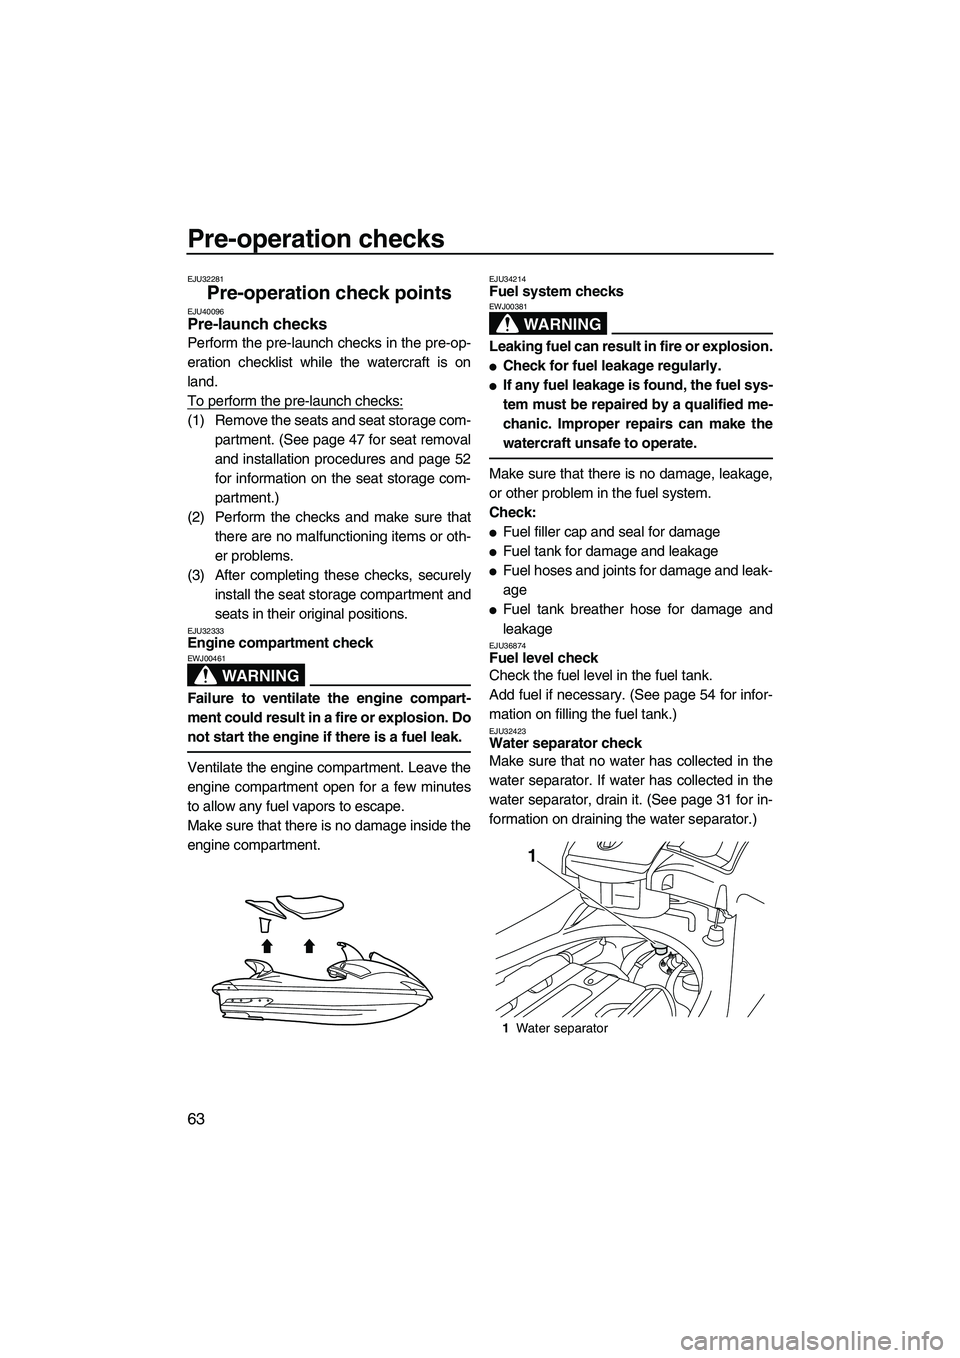 YAMAHA FX SHO 2010  Owners Manual Pre-operation checks
63
EJU32281
Pre-operation check points EJU40096Pre-launch checks 
Perform the pre-launch checks in the pre-op-
eration checklist while the watercraft is on
land.
To perform the pr